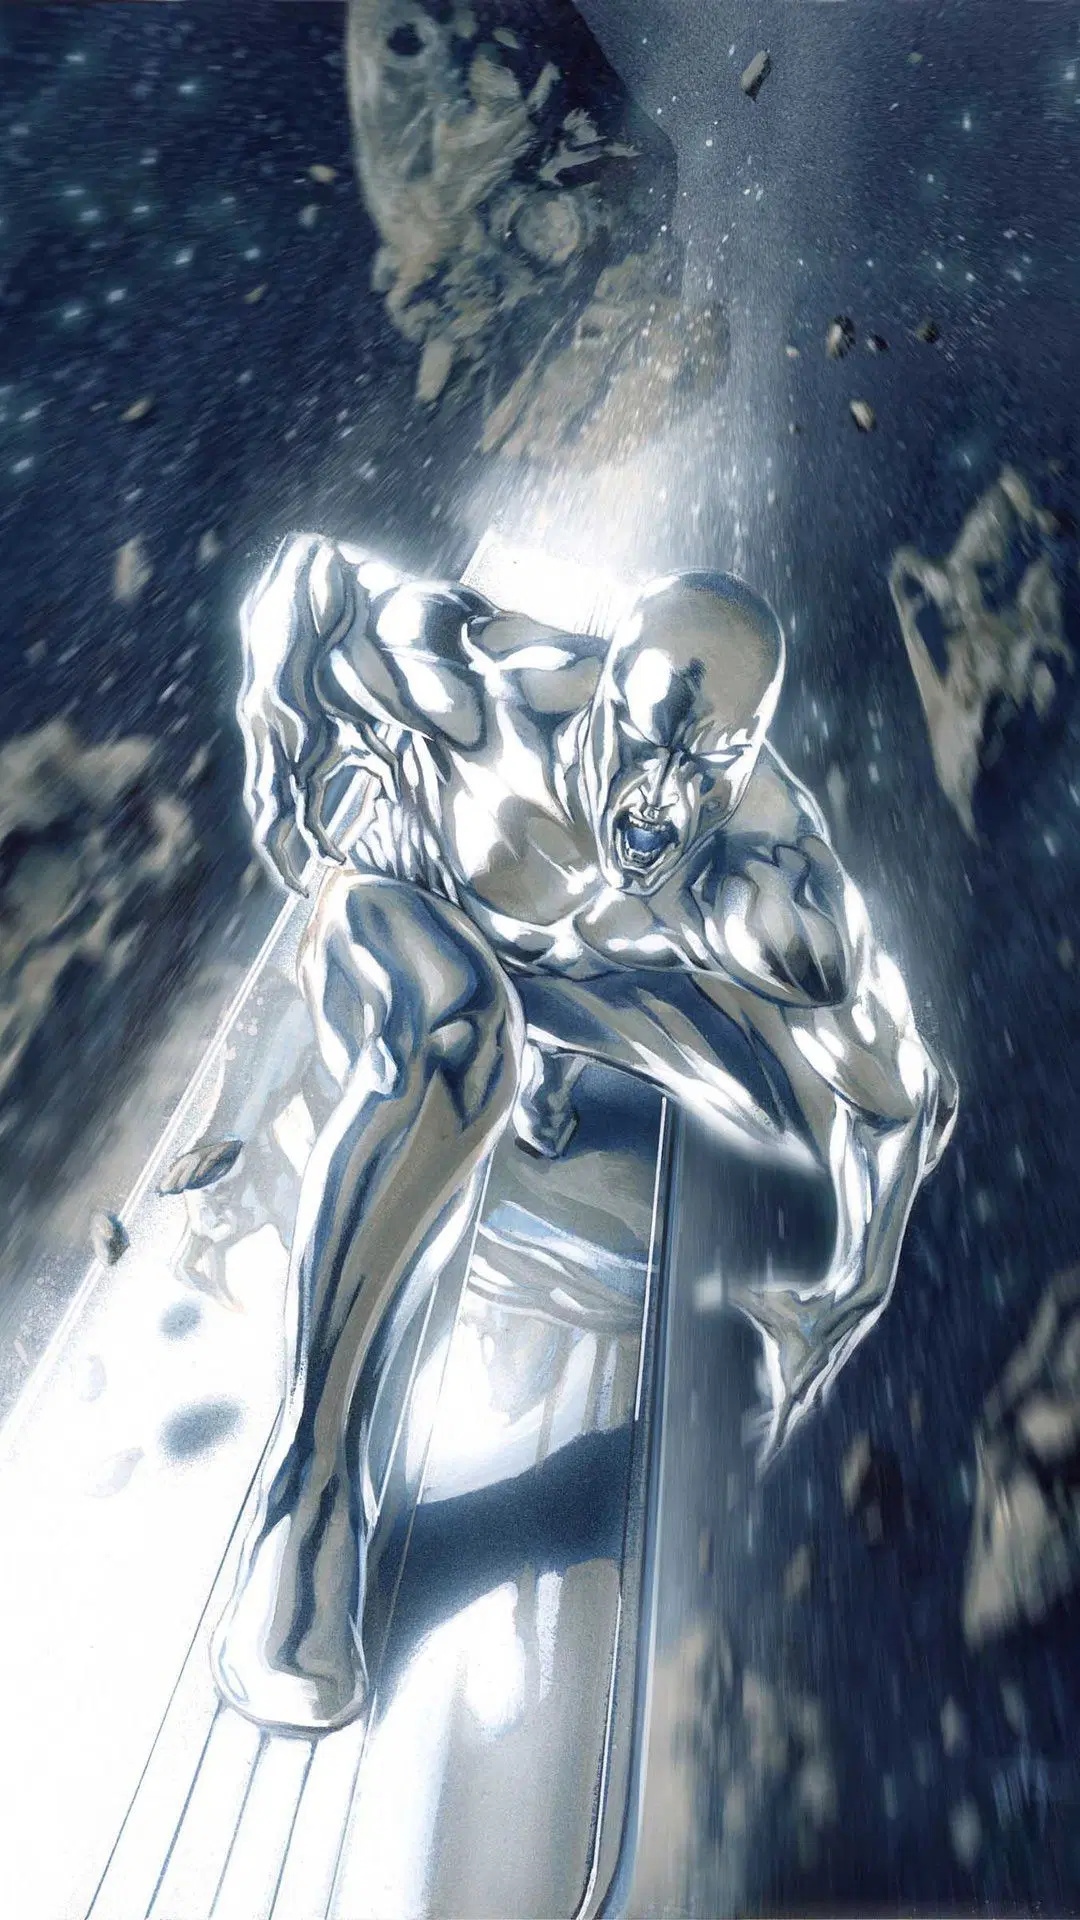 Silver Surfer wallpaper, Android iPhone desktop backgrounds, 1080x1920 Full HD Handy